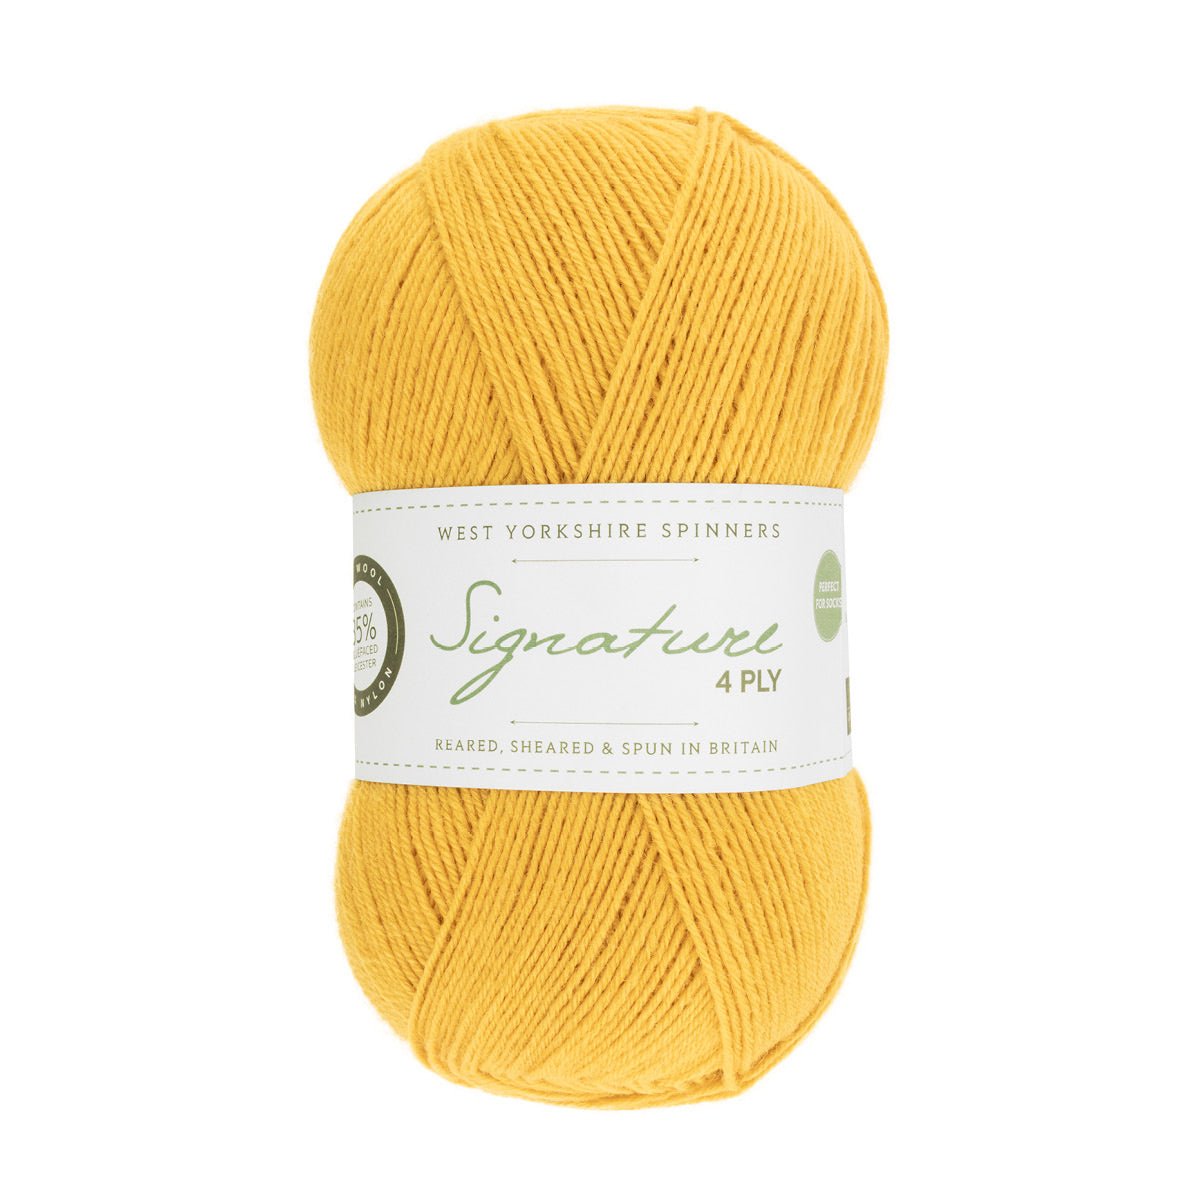 SIGNATURE 4PLY 240-Butterscotch - West Yorkshire Spinners